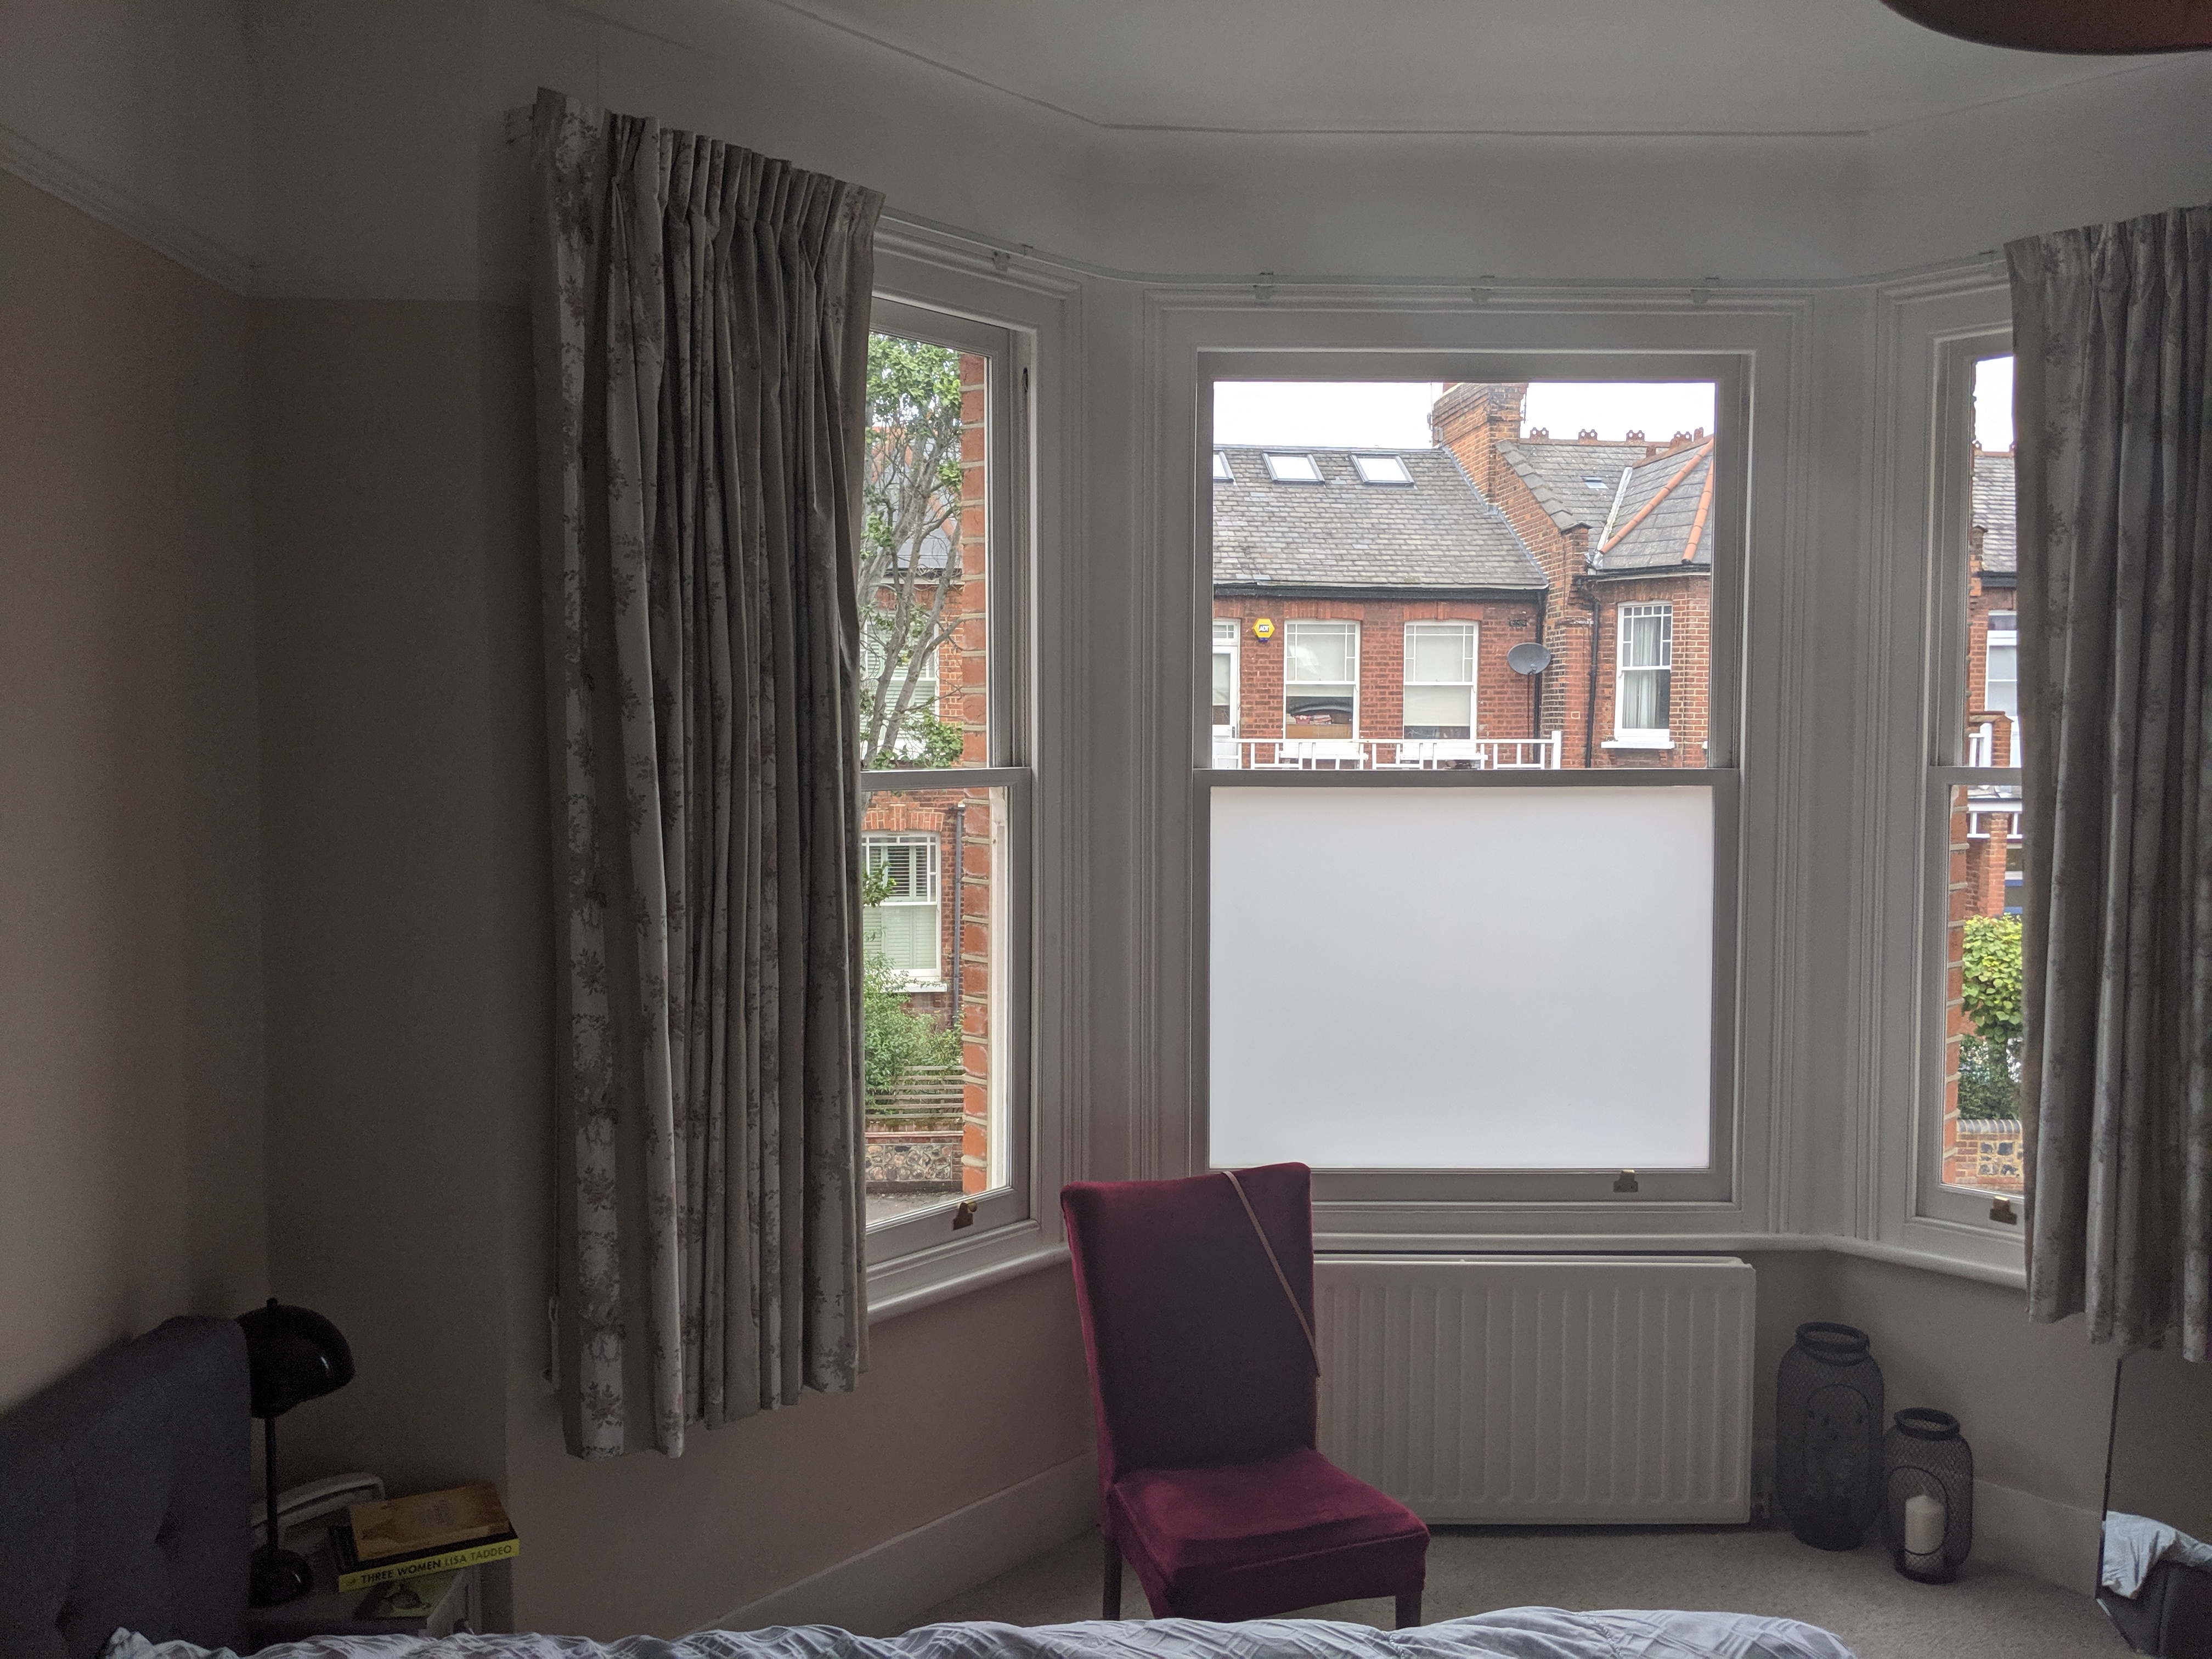 A before photo of the room, showing the peach walls and floral curtains at the window.